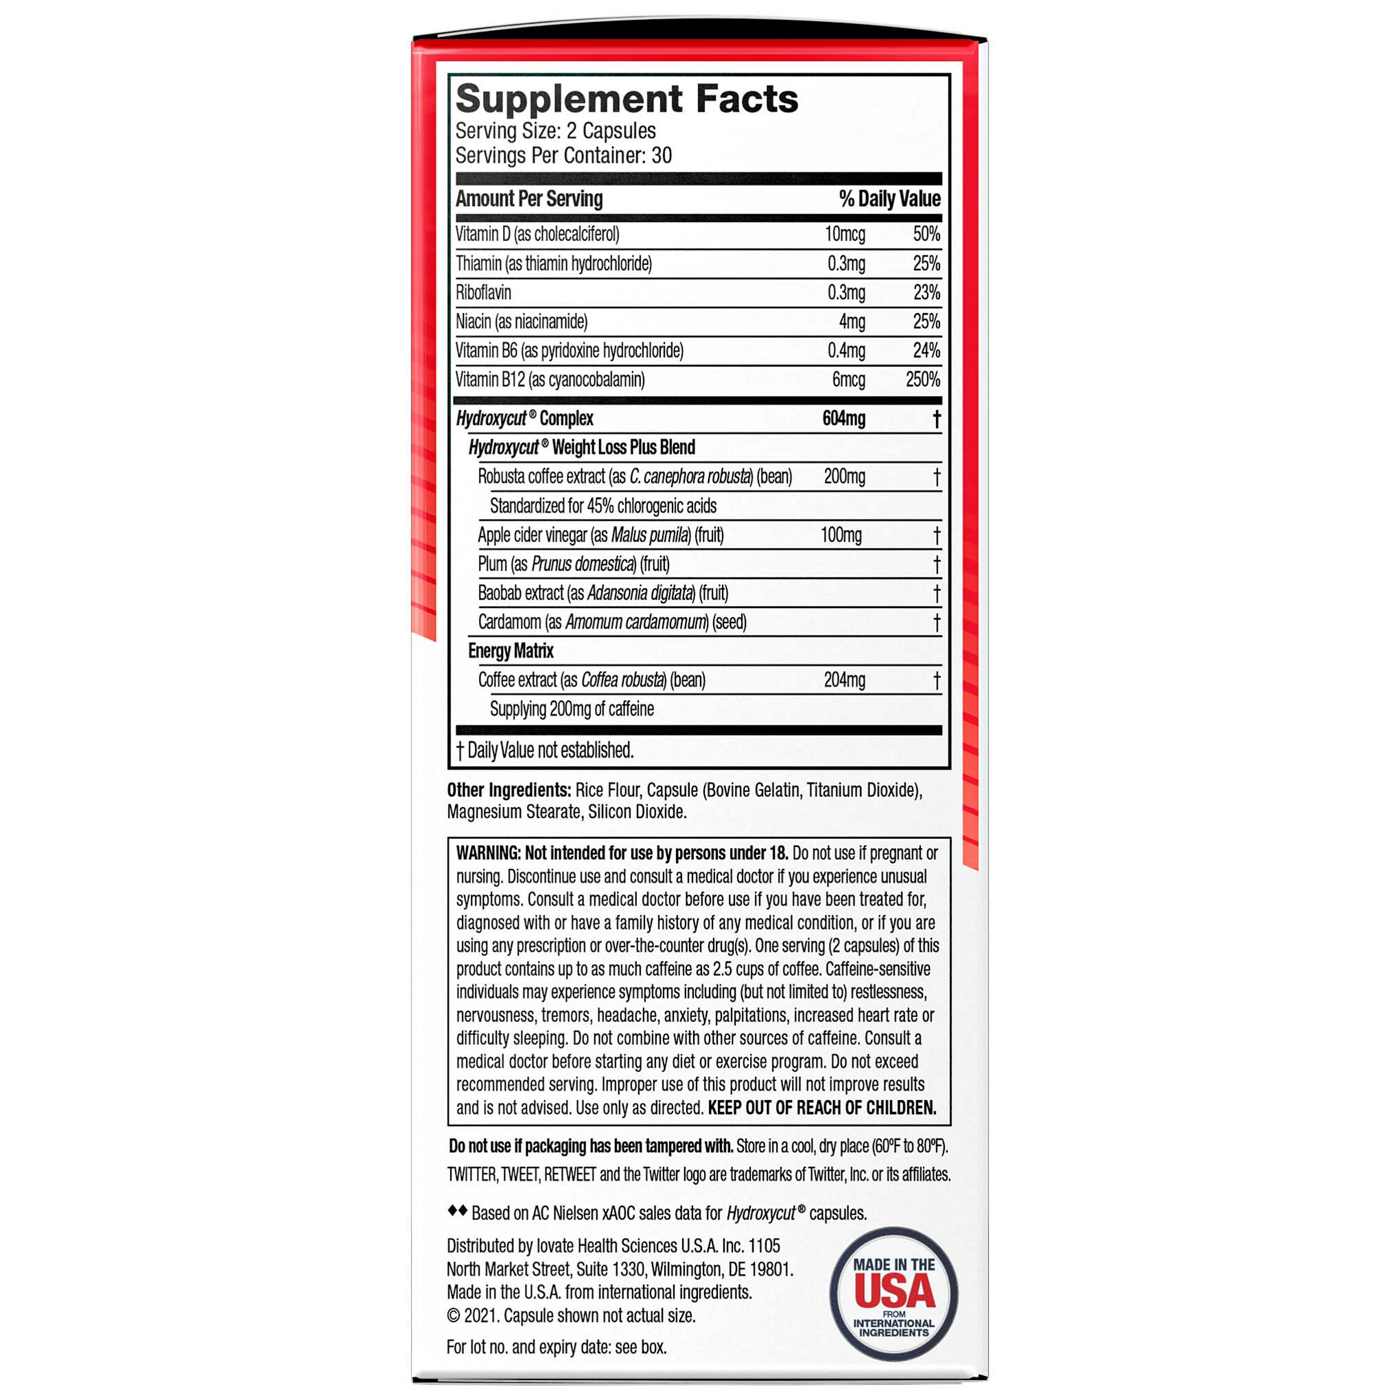 Hydroxycut Weight Loss Original Rapid-Release Caplets; image 4 of 4